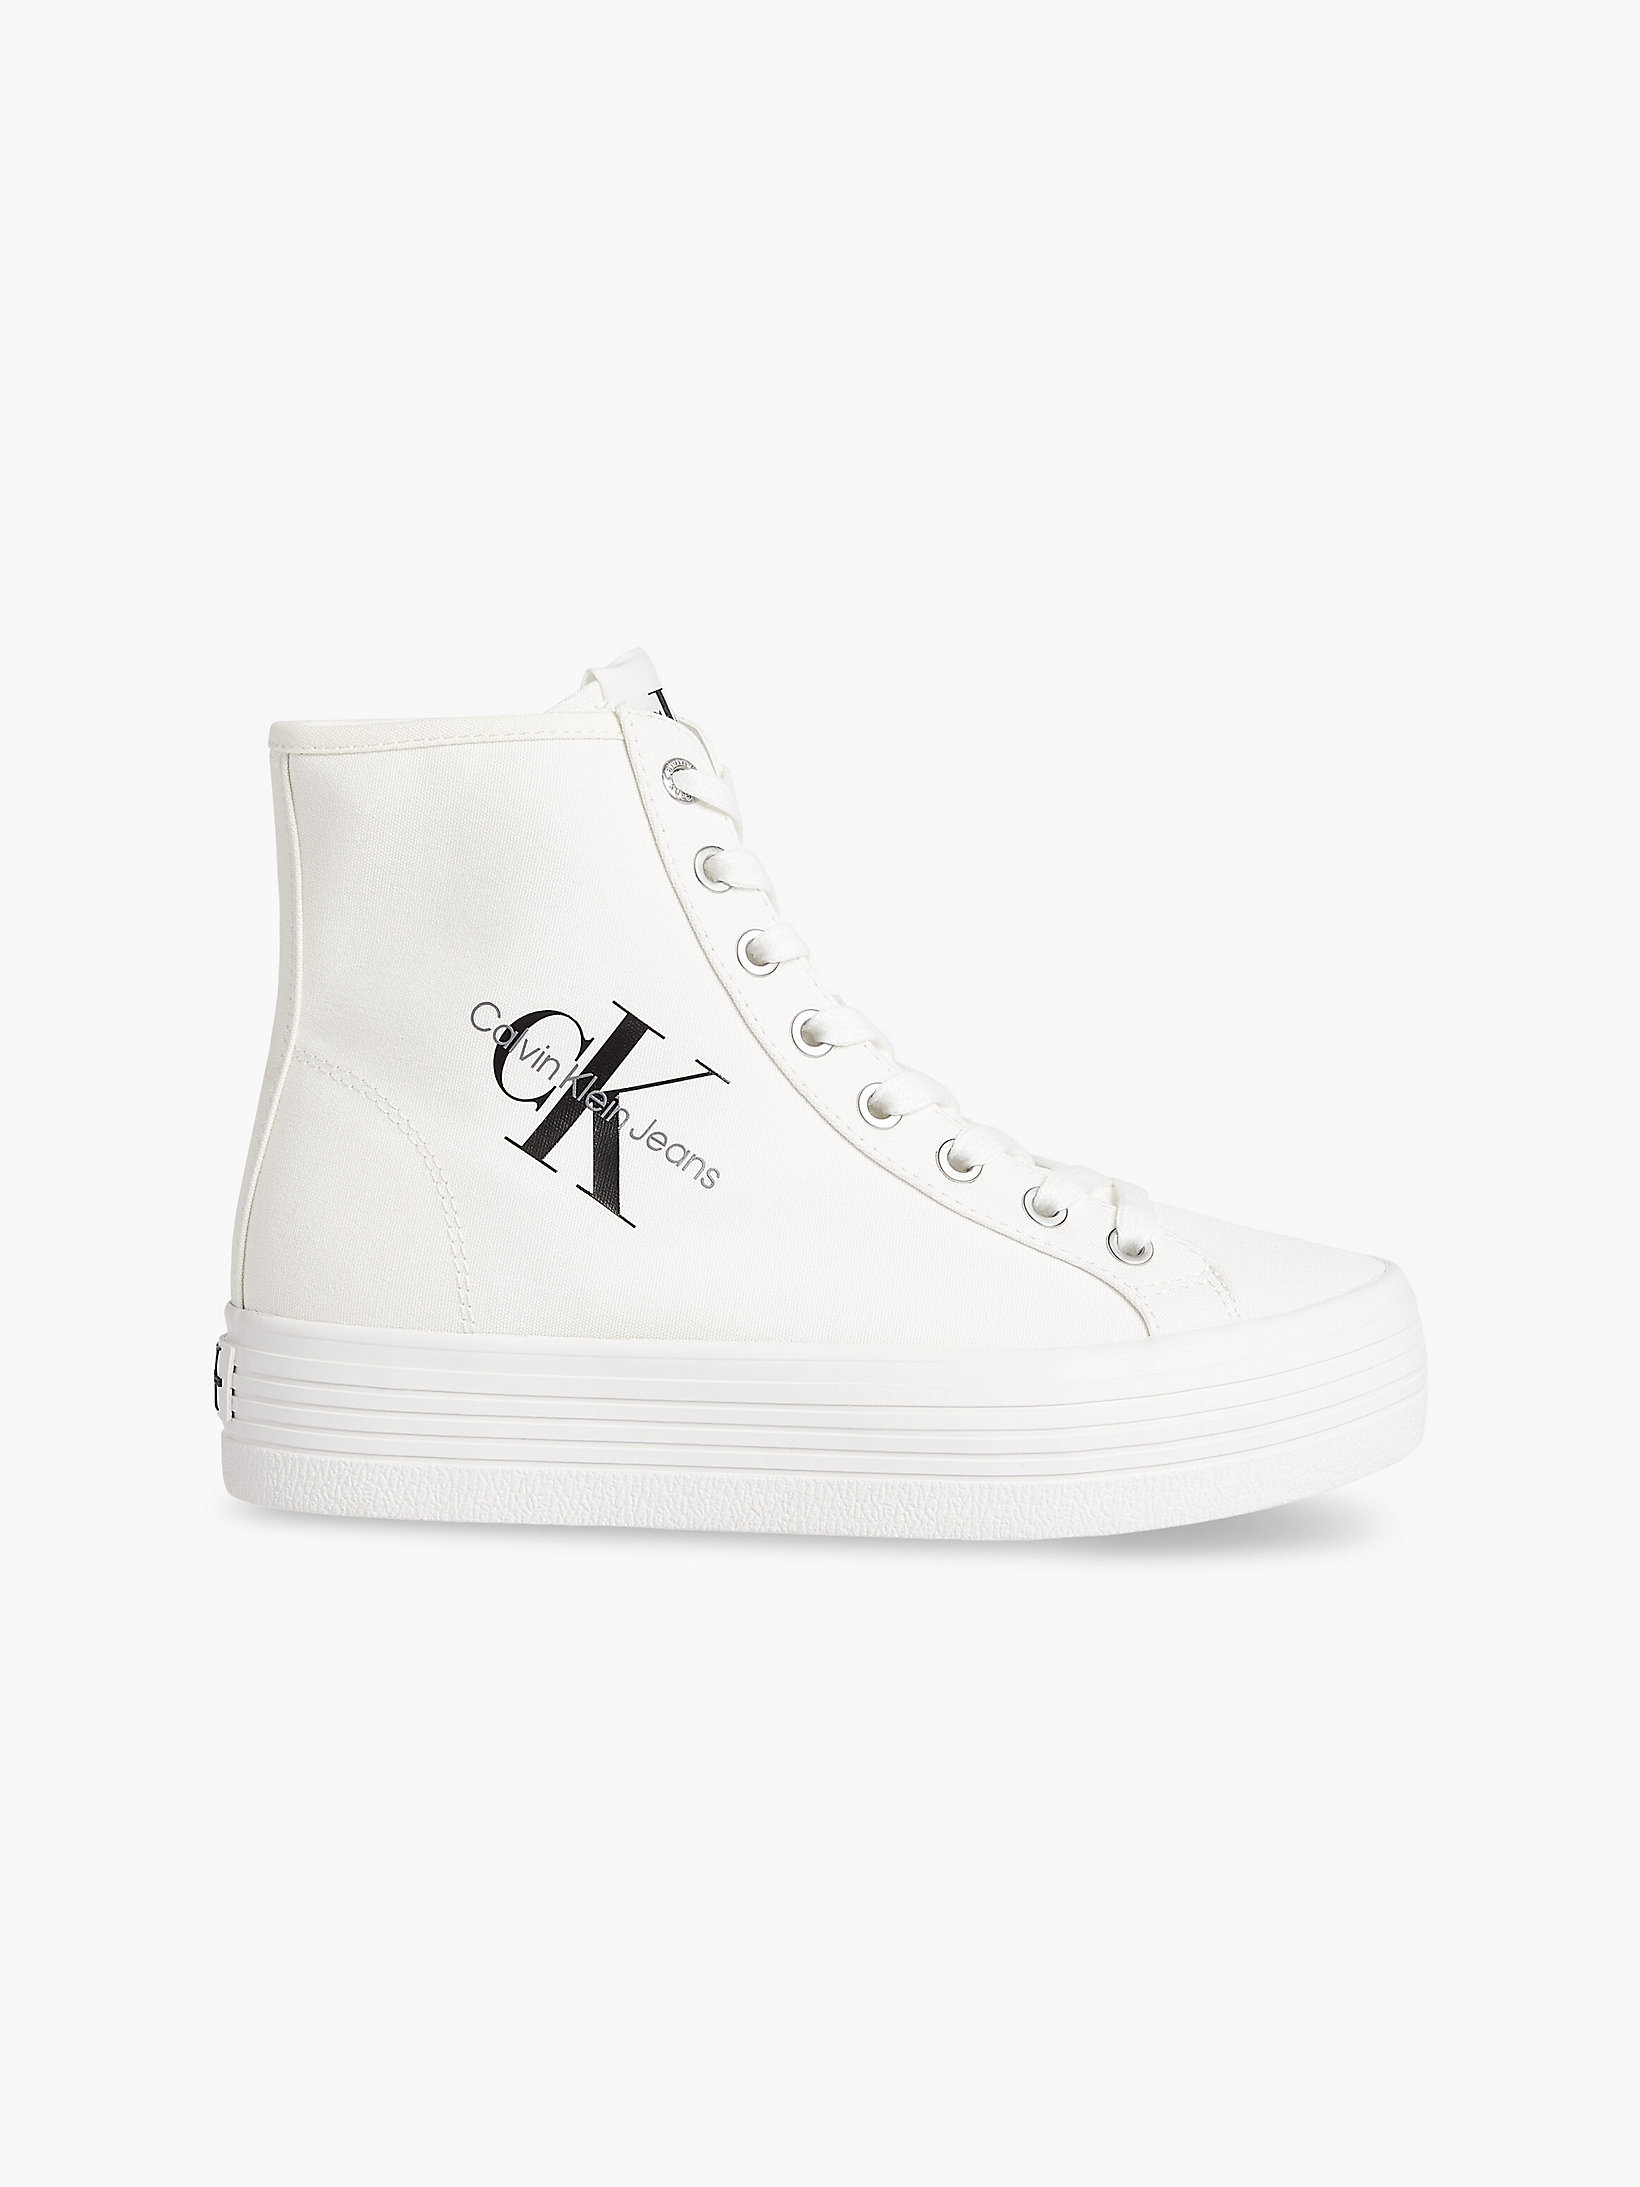 Bright White Recycled Platform High-Top Trainers undefined women Calvin Klein